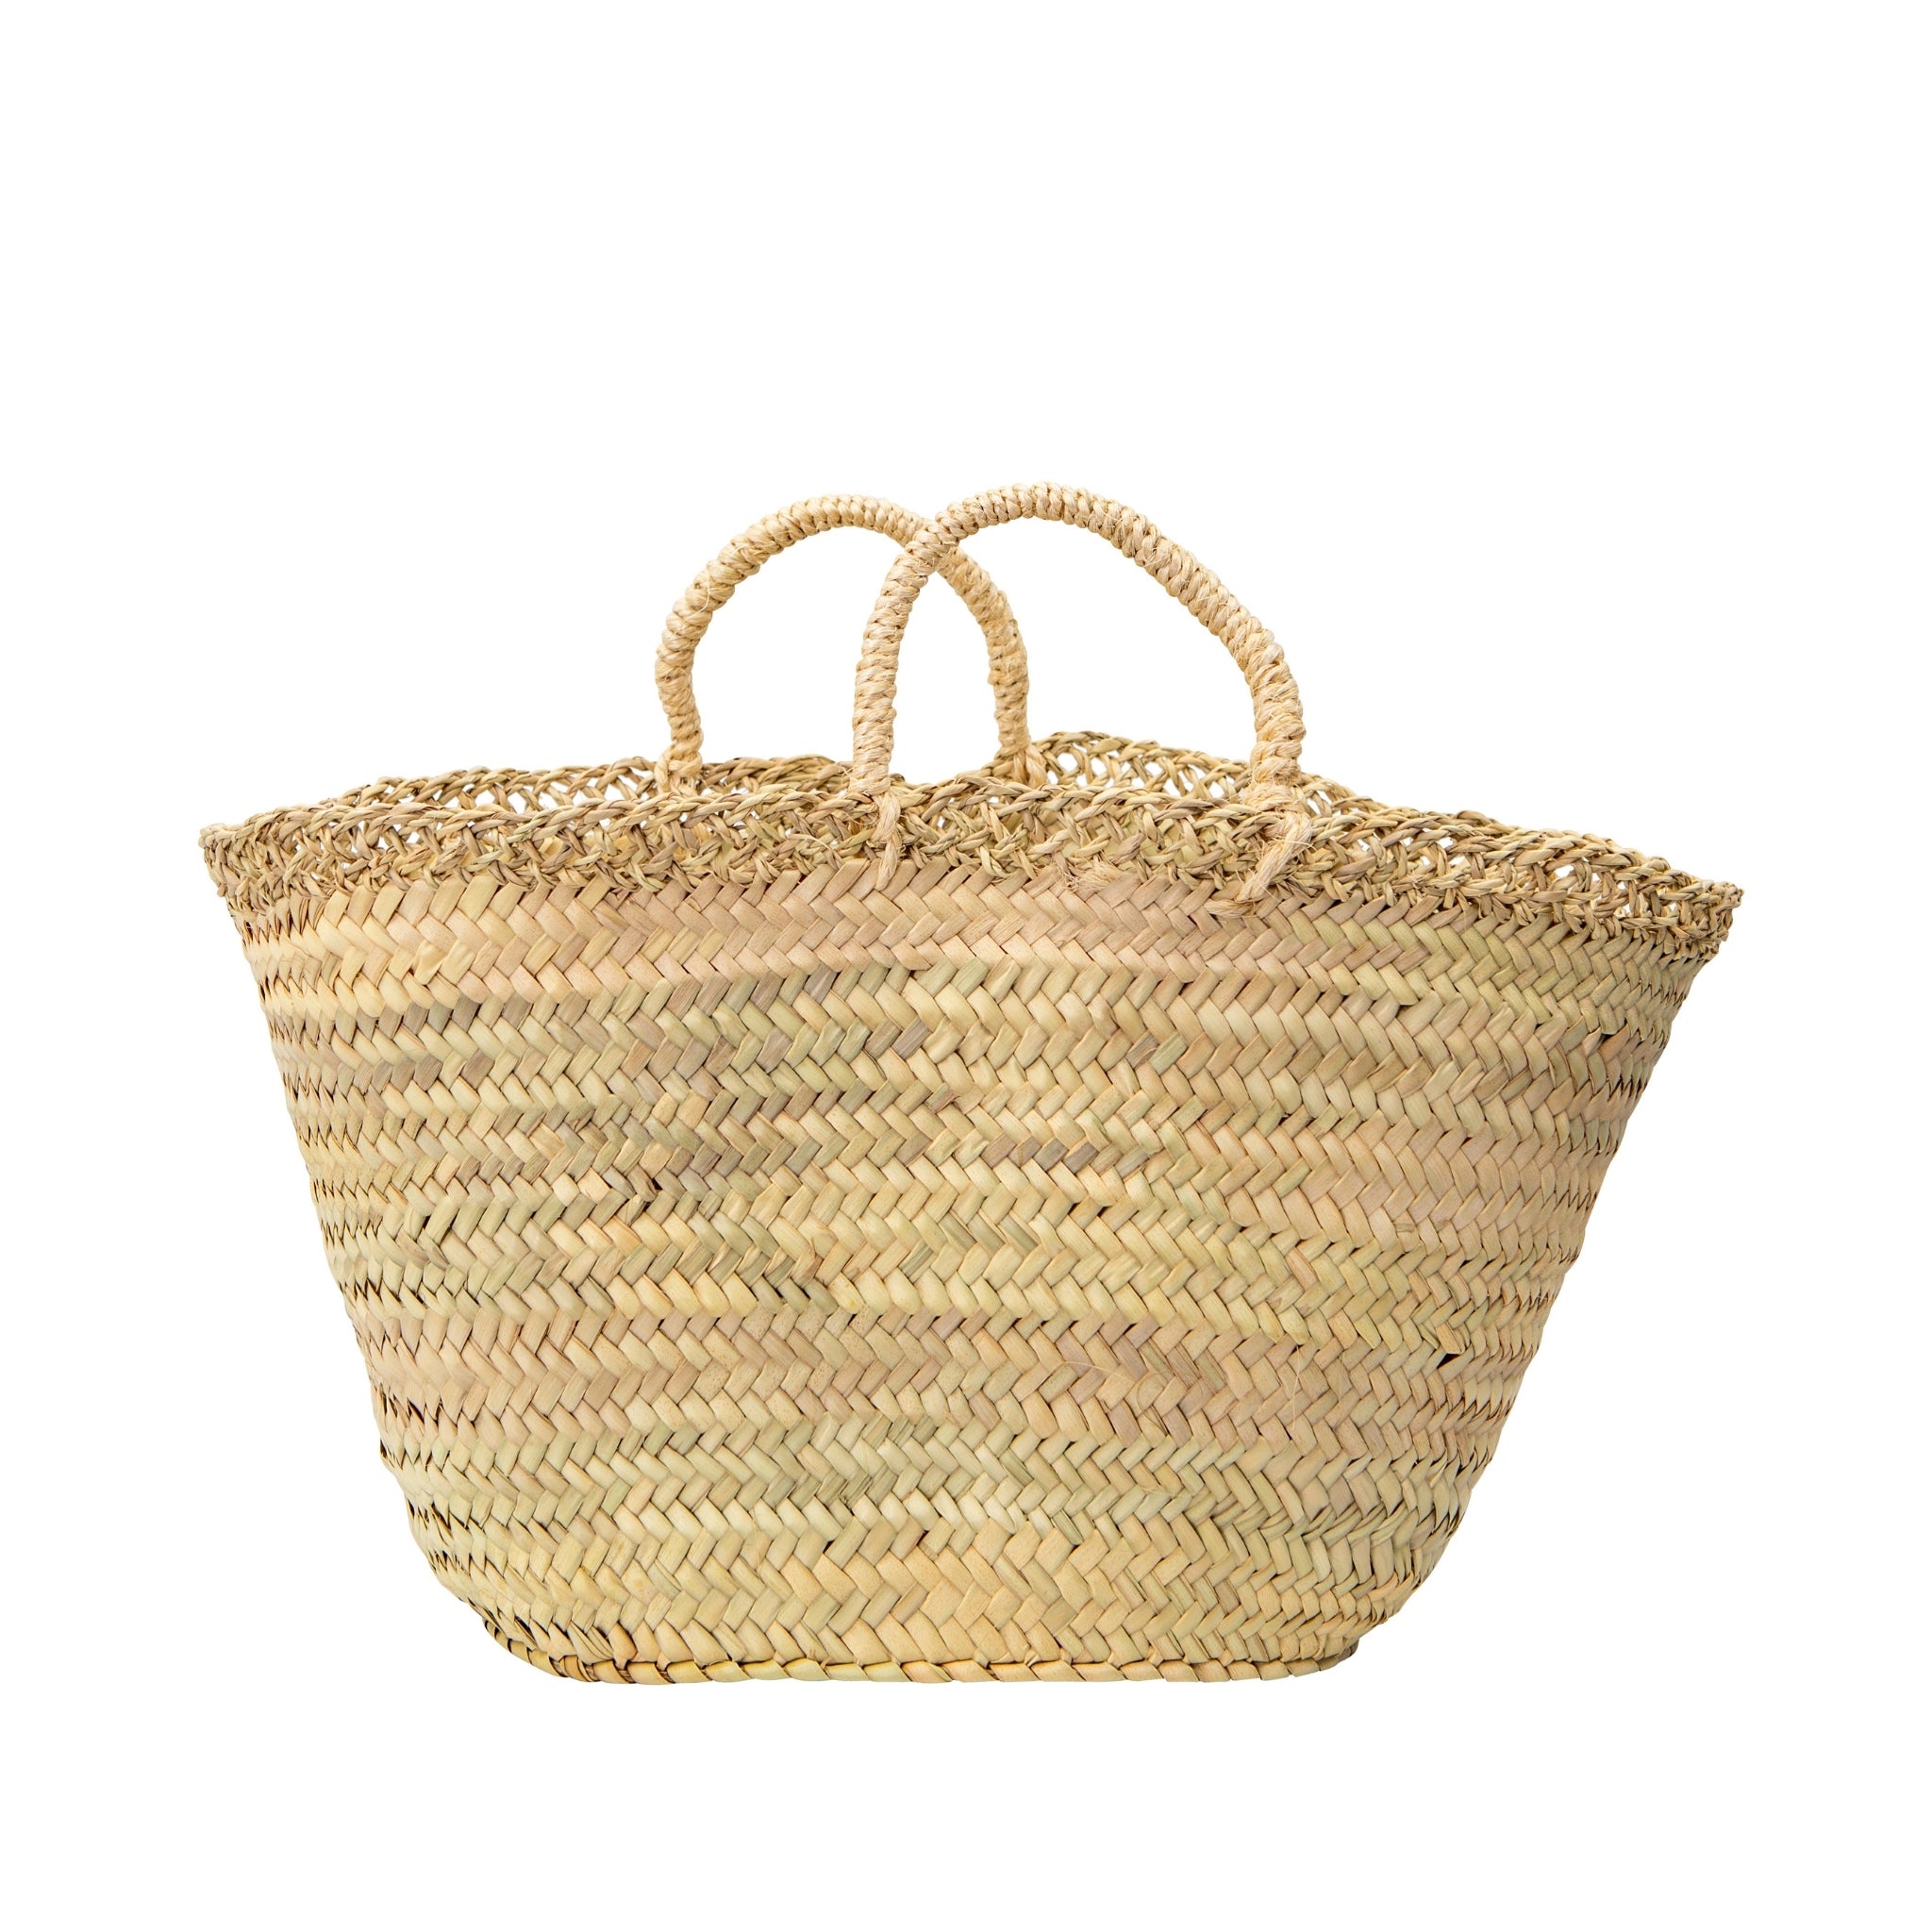 The gorgeous lattice detailing gives this basket a little something special. Handmade in Morocco, this straw basket has short handles and a woven lattice around the top. Handwoven by Moroccan artisans from palm leaves, this beautiful basket is perfect for holidays, days out or as gorgeous rustic storage for your home.